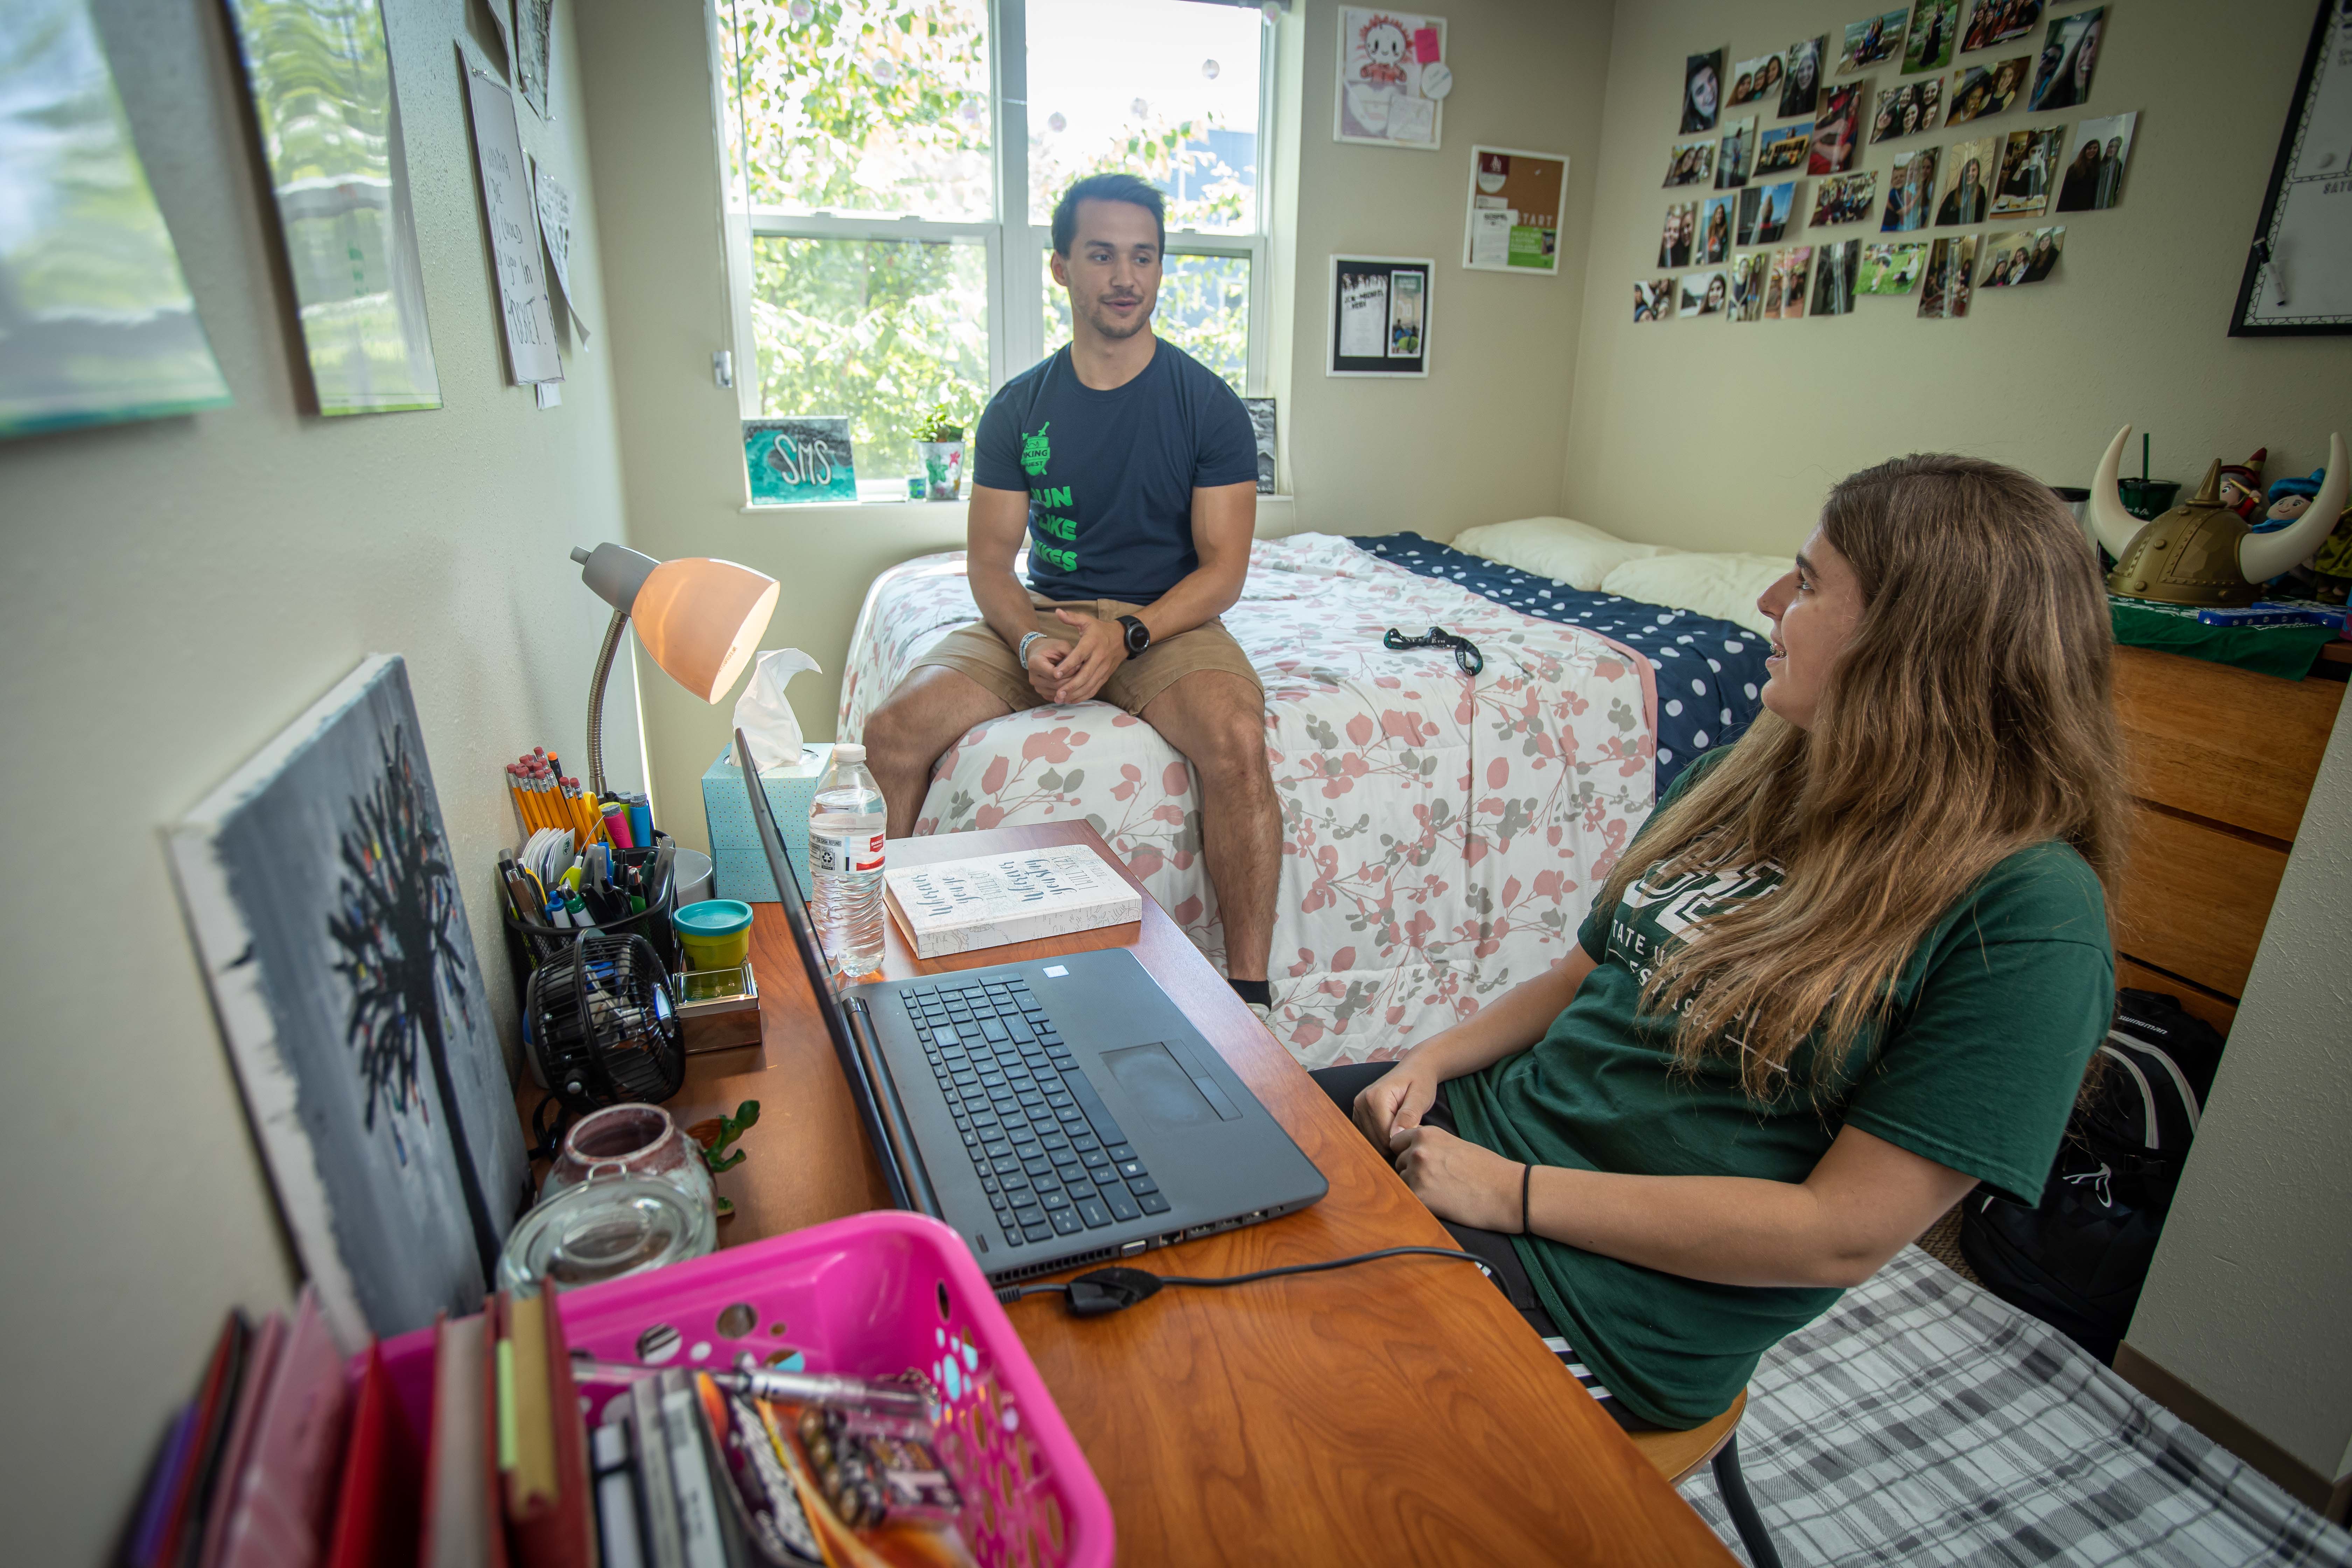 students in dorm room